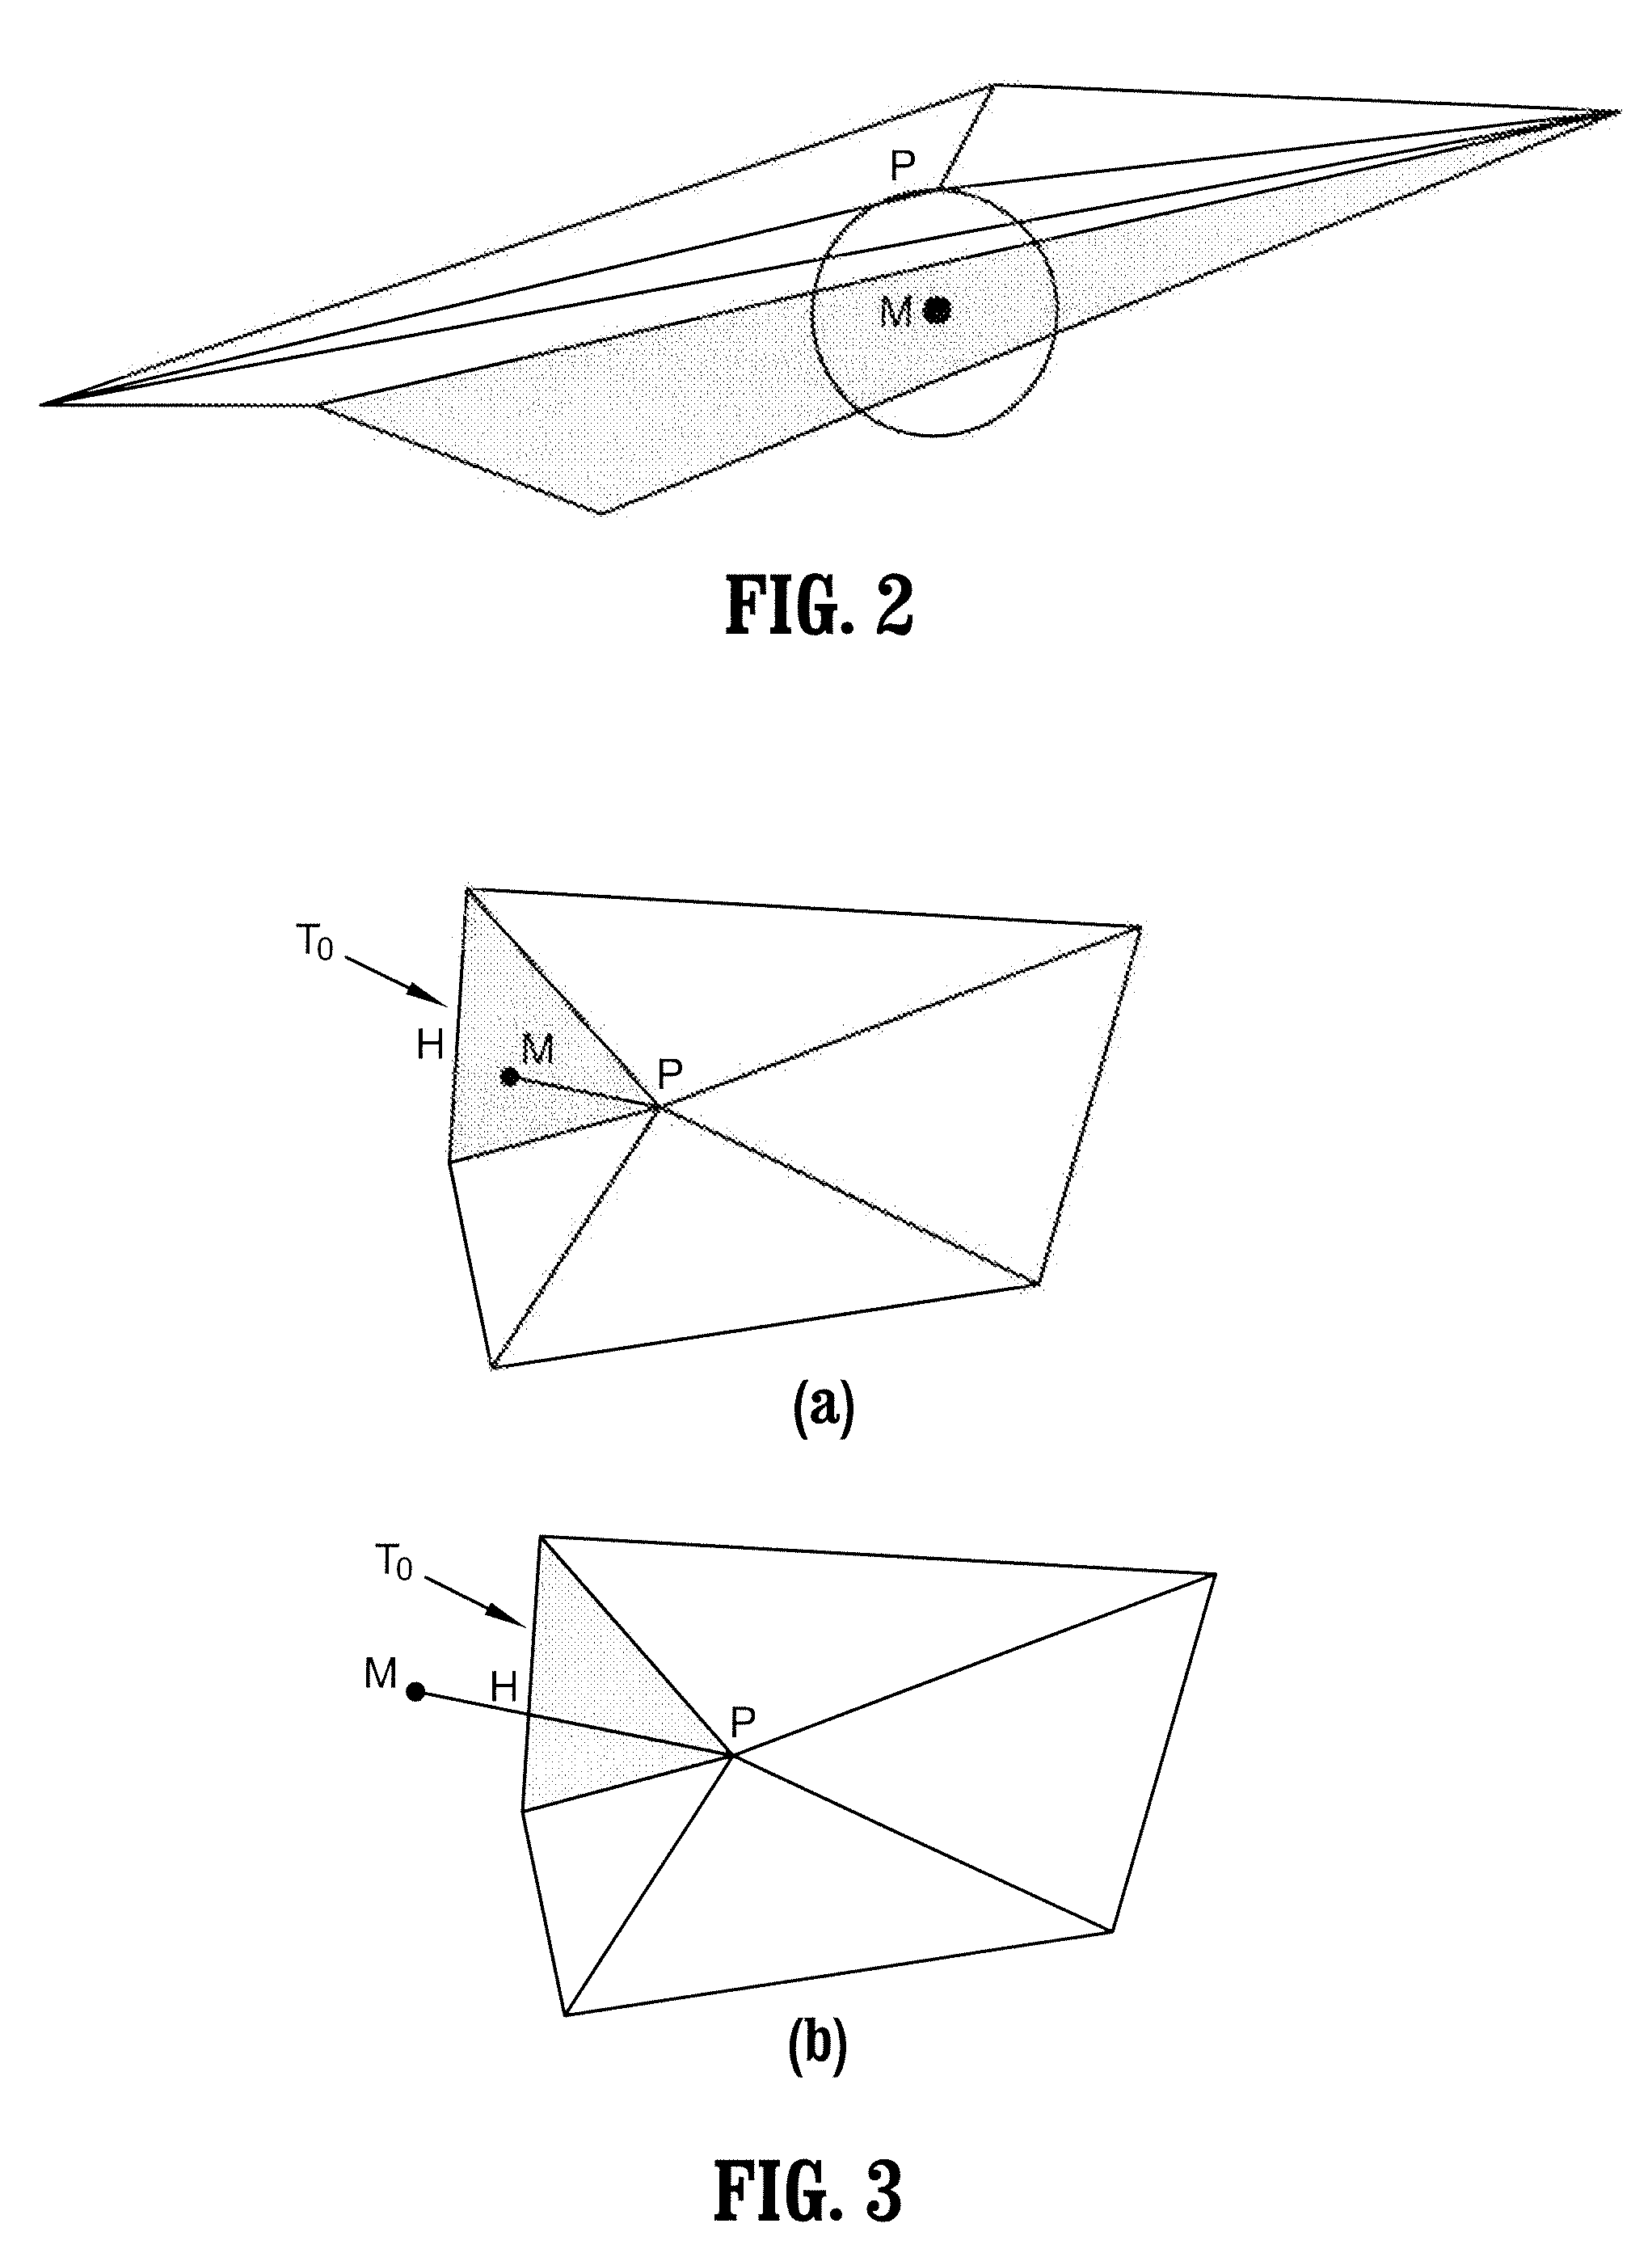 System and method for efficient real-time technique for point localization in and out of a tetrahedral mesh